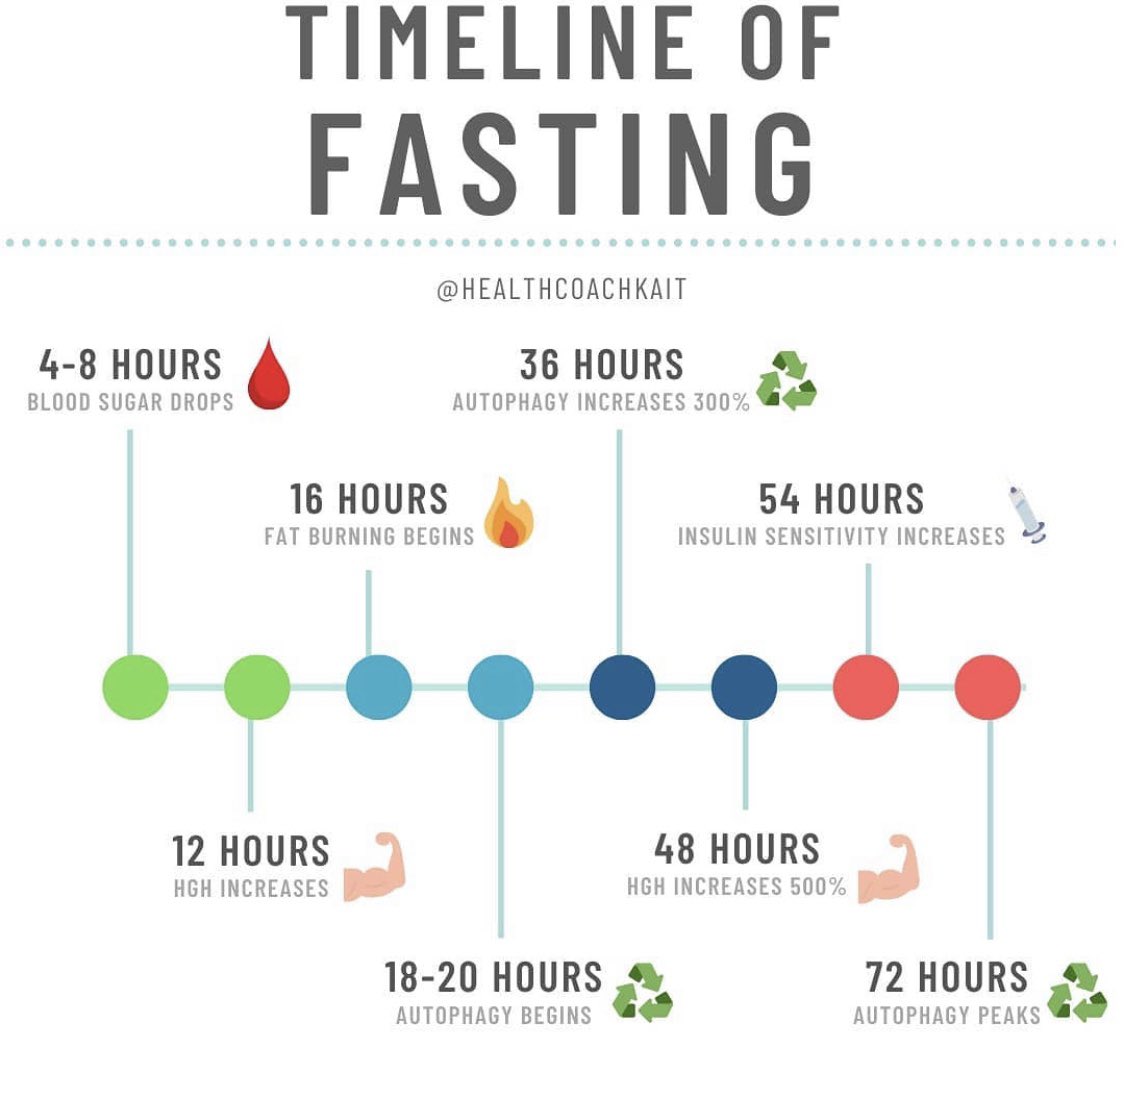 Fasting timeline and its multitude of benefits.